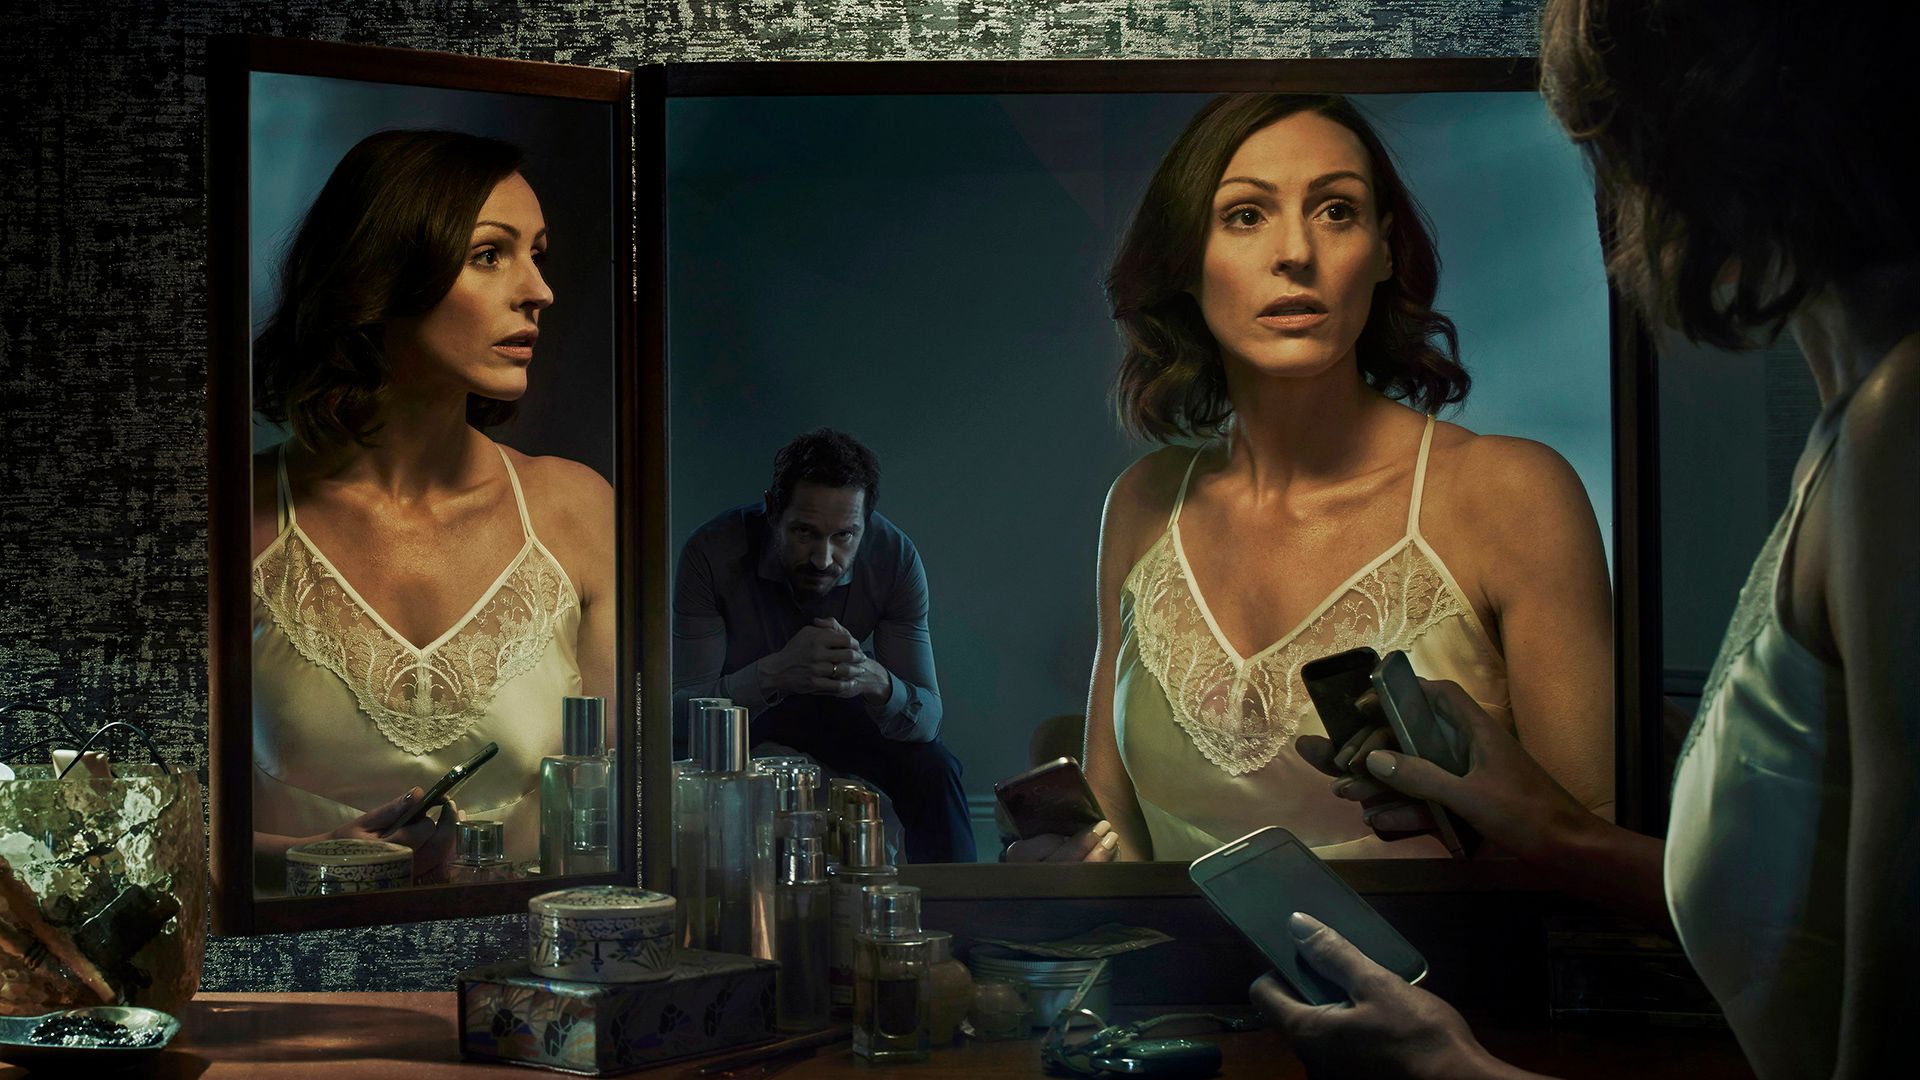 Doctor Foster: A Woman Scorned background